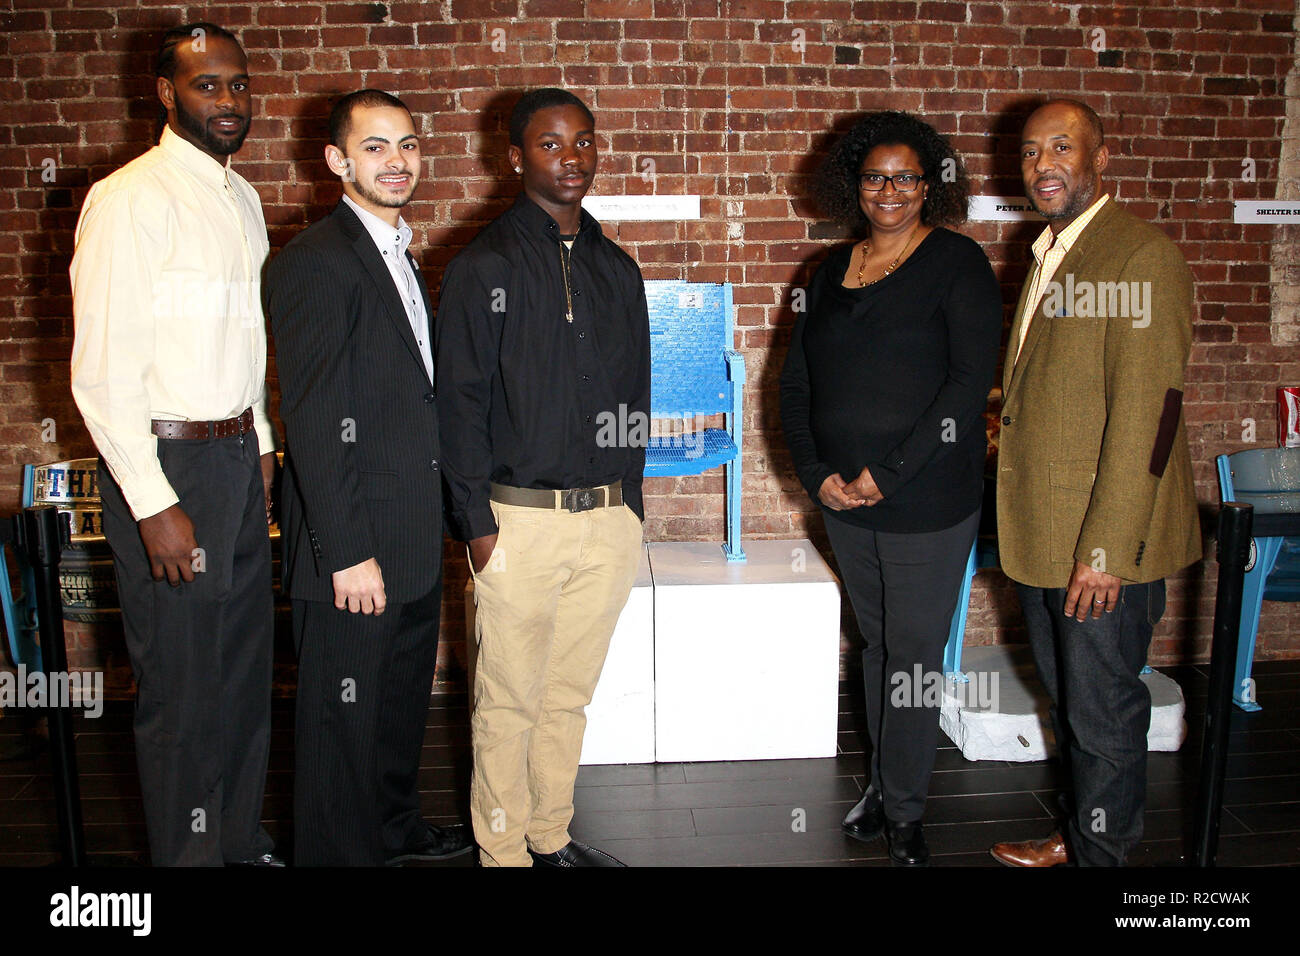 NEW YORK, NY - FEBRUARY 23:  Aaron Willion, Luis Rosa, Aaron Nelson, Lutonya Russell-Humes and Nate Adams of The Boys & Girls Club of America attend City Seats Auction at 287 Gallery on February 23, 2017 in New York City.  (Photo by Steve Mack/S.D. Mack Pictures) Stock Photo